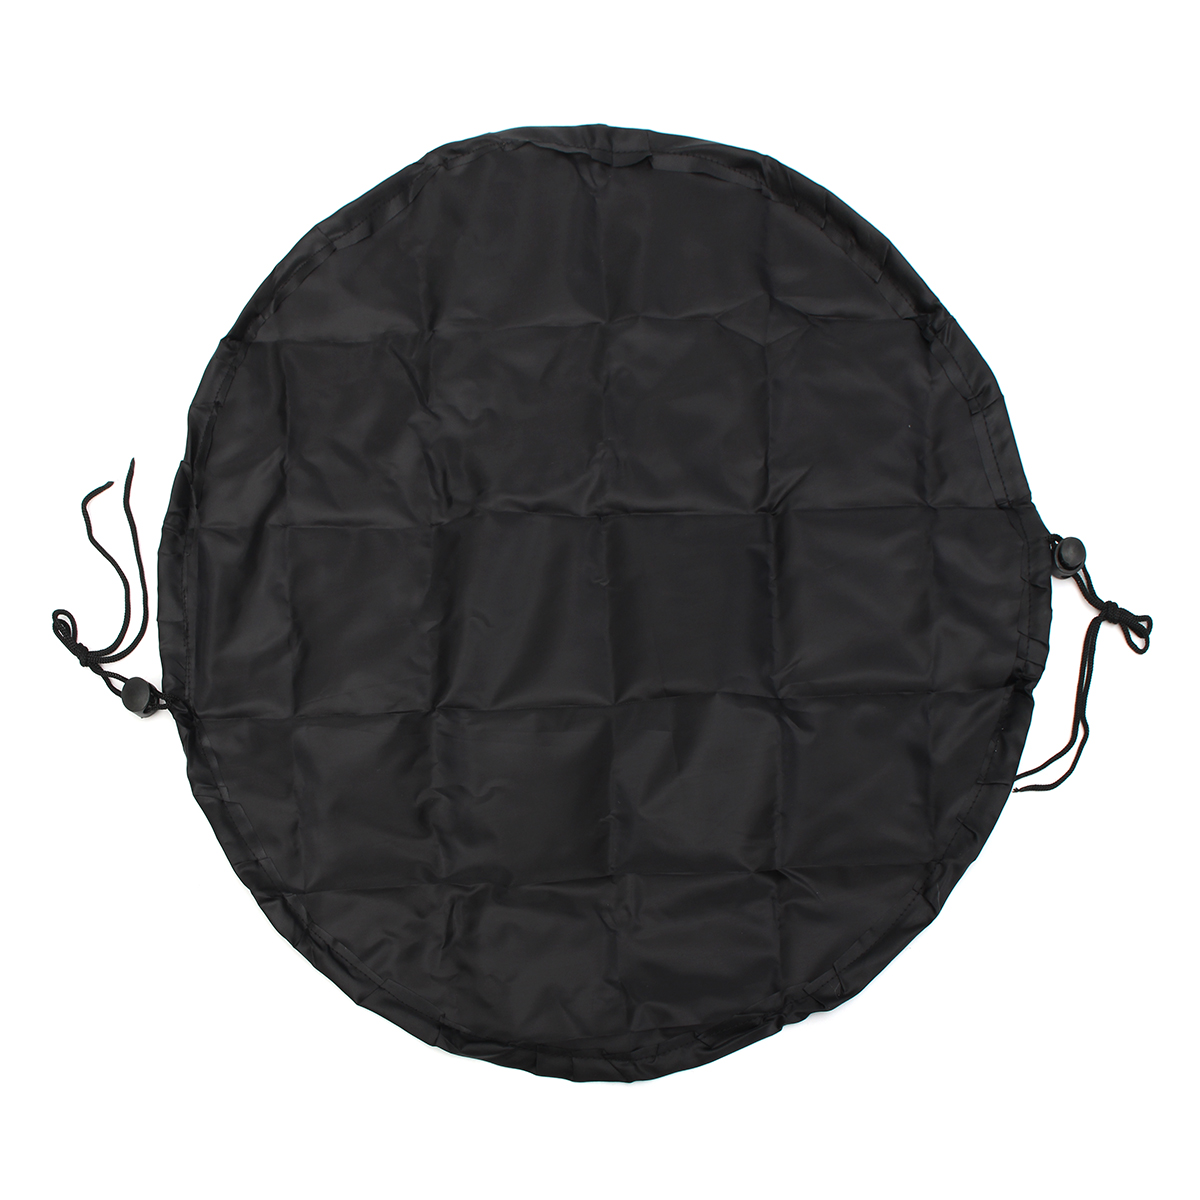 

Black Waterproof Wetsuit Mat Bag Nylon Beach Surf Change Carry Changing Clothes Storage Bag Container